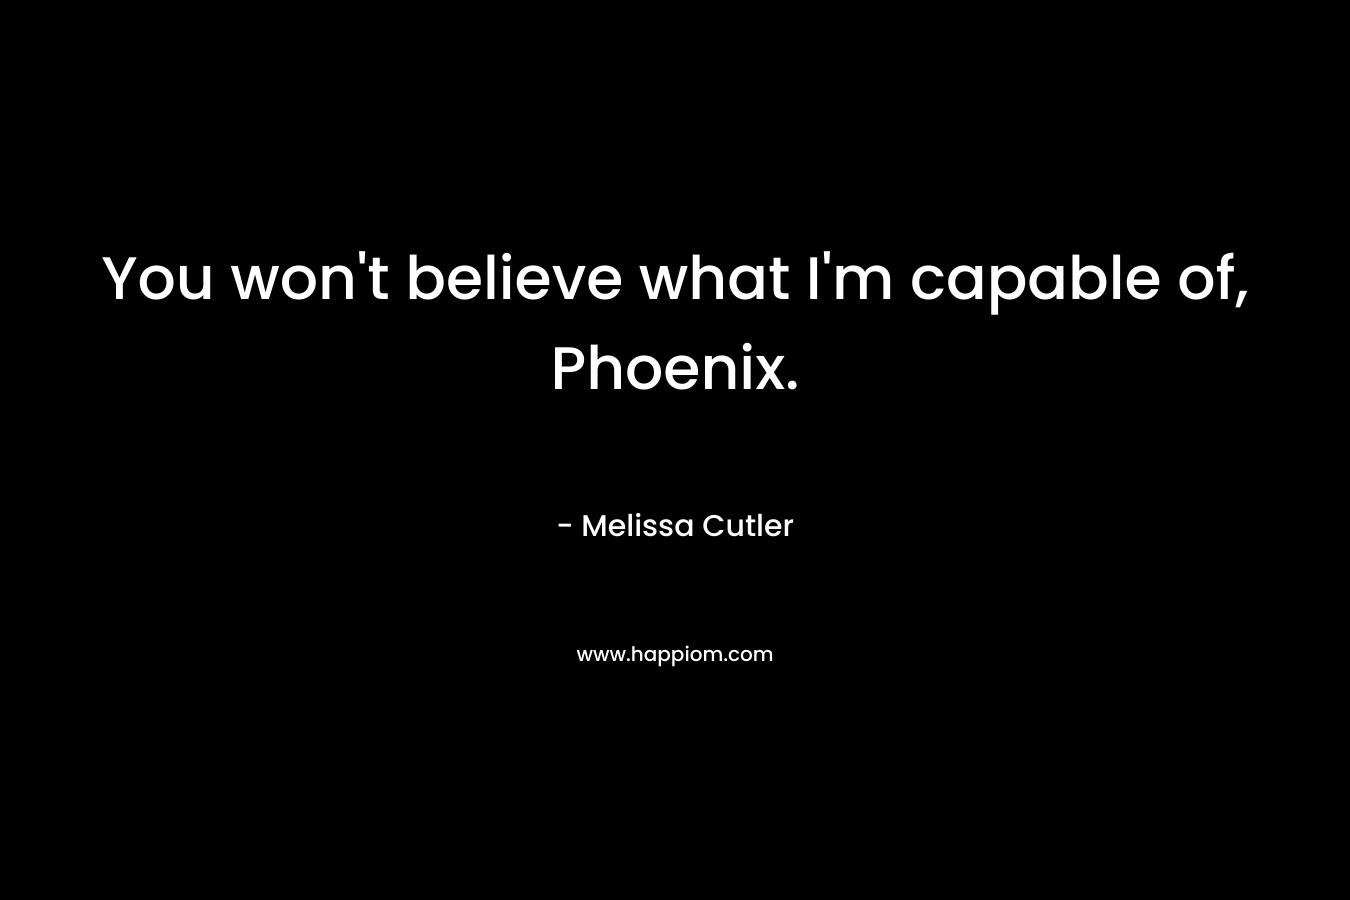 You won't believe what I'm capable of, Phoenix.